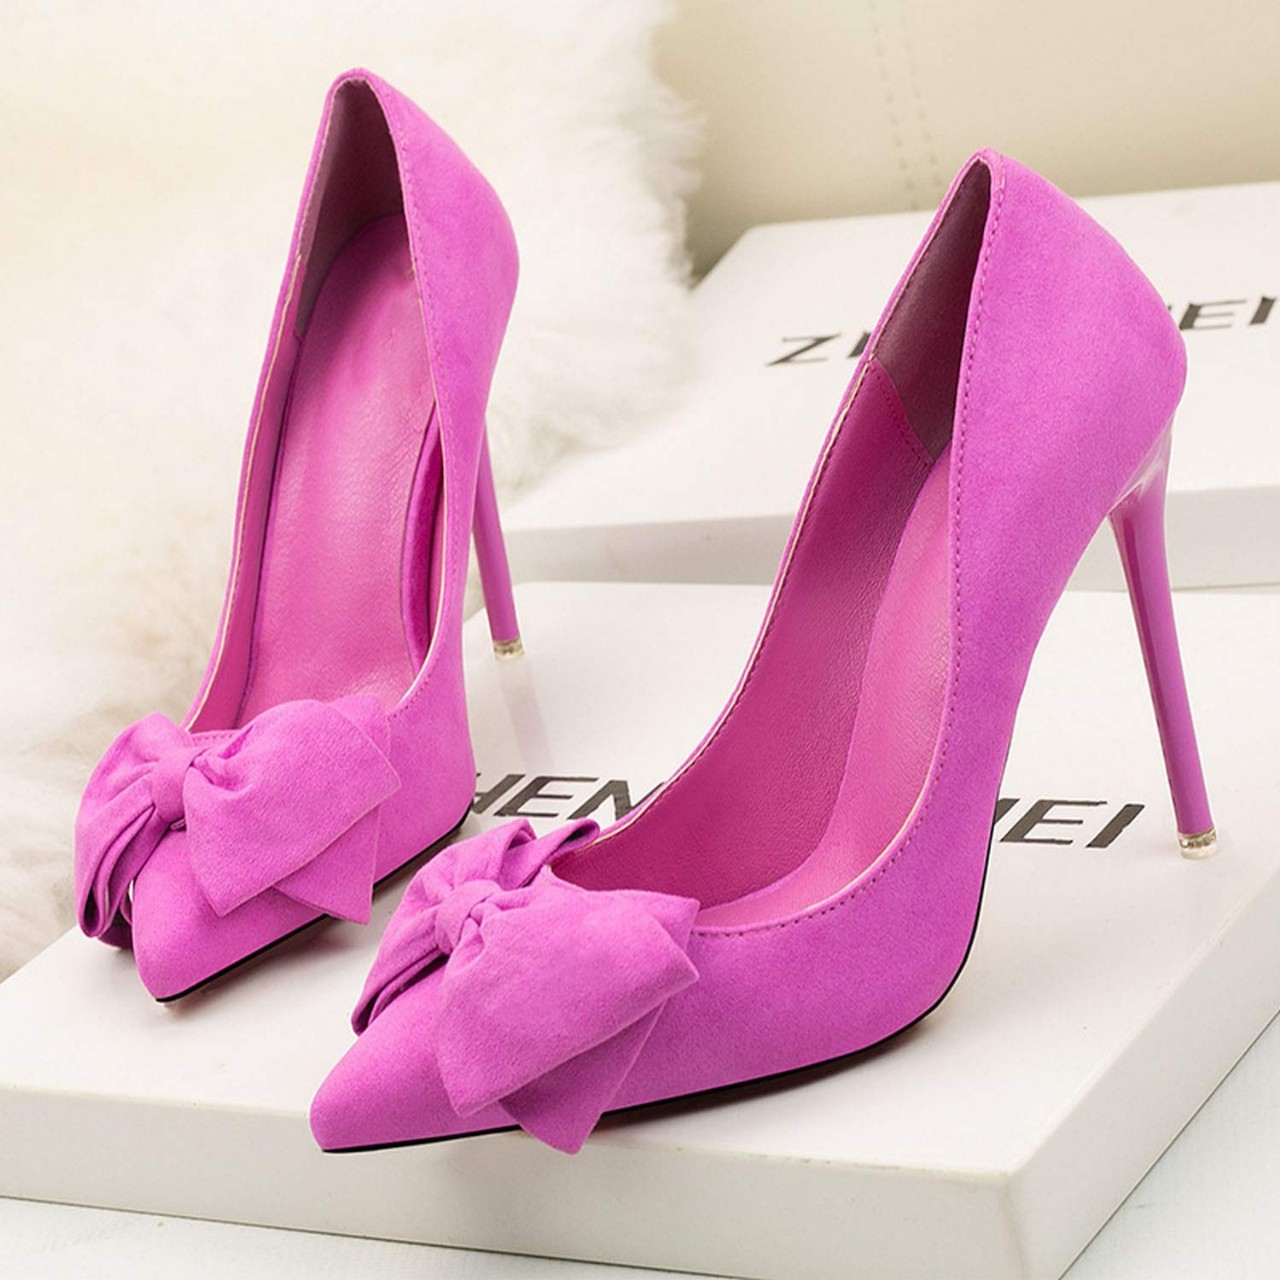 Women Pumps 2019 Women Shoes Extreme High Heels Fashion Pointed Toe Wedding Ladies Shoes Stiletto